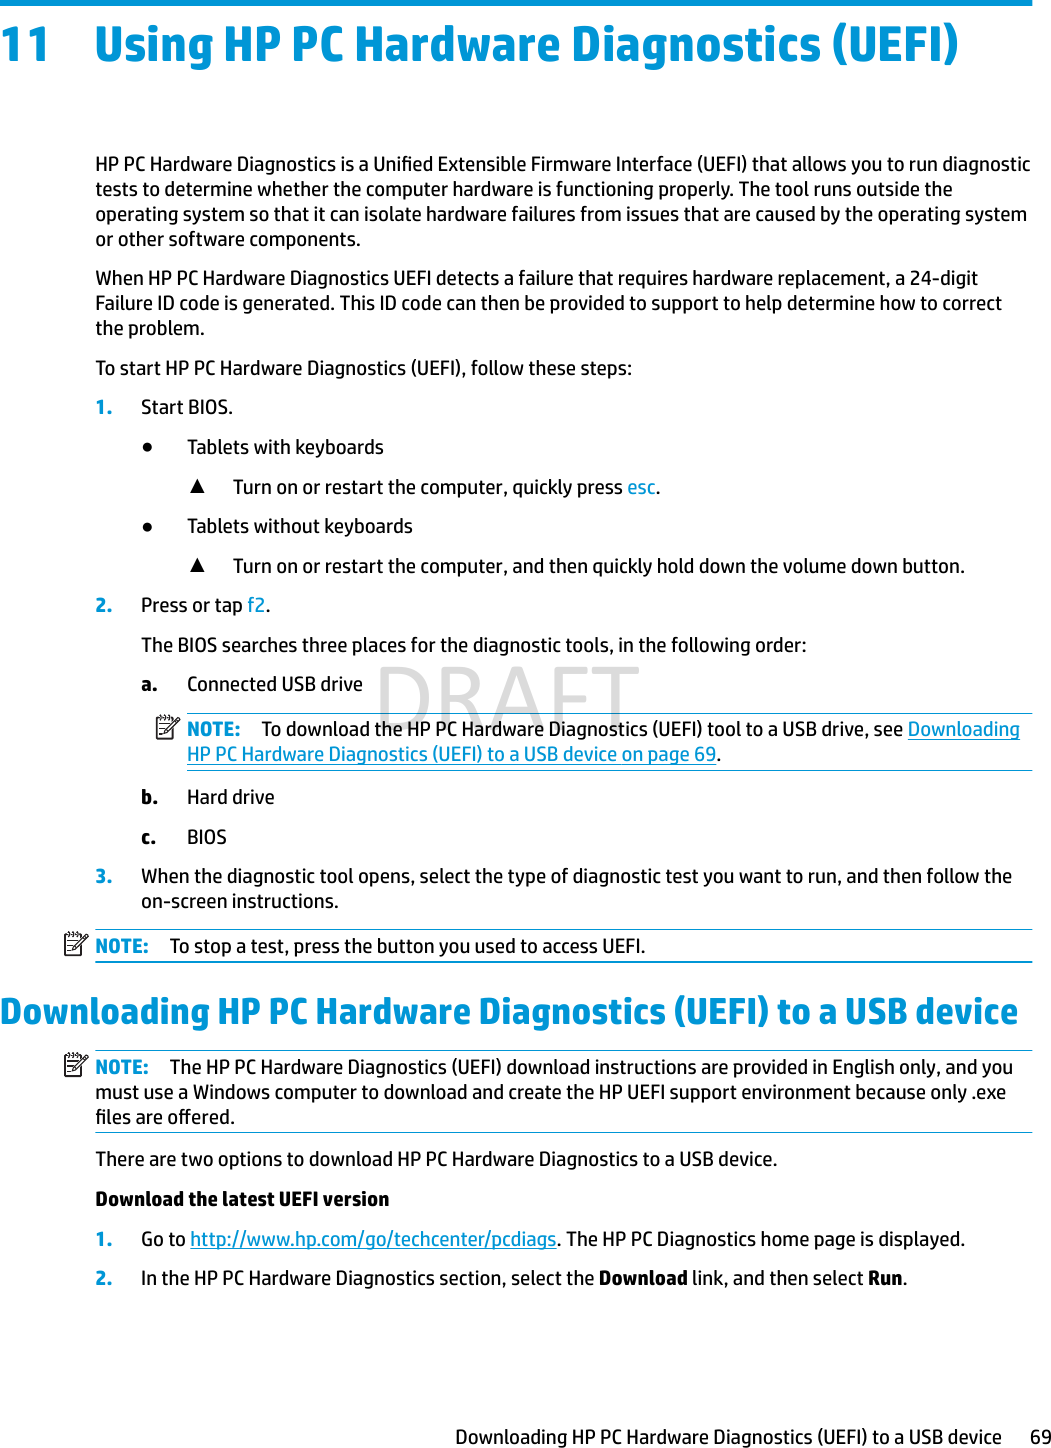 11 Using HP PC Hardware Diagnostics (UEFI)HP PC Hardware Diagnostics is a Unied Extensible Firmware Interface (UEFI) that allows you to run diagnostic tests to determine whether the computer hardware is functioning properly. The tool runs outside the operating system so that it can isolate hardware failures from issues that are caused by the operating system or other software components.When HP PC Hardware Diagnostics UEFI detects a failure that requires hardware replacement, a 24-digit Failure ID code is generated. This ID code can then be provided to support to help determine how to correct the problem.To start HP PC Hardware Diagnostics (UEFI), follow these steps:1. Start BIOS.●Tablets with keyboards▲Turn on or restart the computer, quickly press esc.●Tablets without keyboards▲Turn on or restart the computer, and then quickly hold down the volume down button.2. Press or tap f2.The BIOS searches three places for the diagnostic tools, in the following order:a. Connected USB driveNOTE: To download the HP PC Hardware Diagnostics (UEFI) tool to a USB drive, see Downloading HP PC Hardware Diagnostics (UEFI) to a USB device on page 69.b. Hard drivec. BIOS3. When the diagnostic tool opens, select the type of diagnostic test you want to run, and then follow the on-screen instructions.NOTE: To stop a test, press the button you used to access UEFI.Downloading HP PC Hardware Diagnostics (UEFI) to a USB deviceNOTE: The HP PC Hardware Diagnostics (UEFI) download instructions are provided in English only, and you must use a Windows computer to download and create the HP UEFI support environment because only .exe les are oered.There are two options to download HP PC Hardware Diagnostics to a USB device.Download the latest UEFI version1. Go to http://www.hp.com/go/techcenter/pcdiags. The HP PC Diagnostics home page is displayed.2. In the HP PC Hardware Diagnostics section, select the Download link, and then select Run.Downloading HP PC Hardware Diagnostics (UEFI) to a USB device 69DRAFT